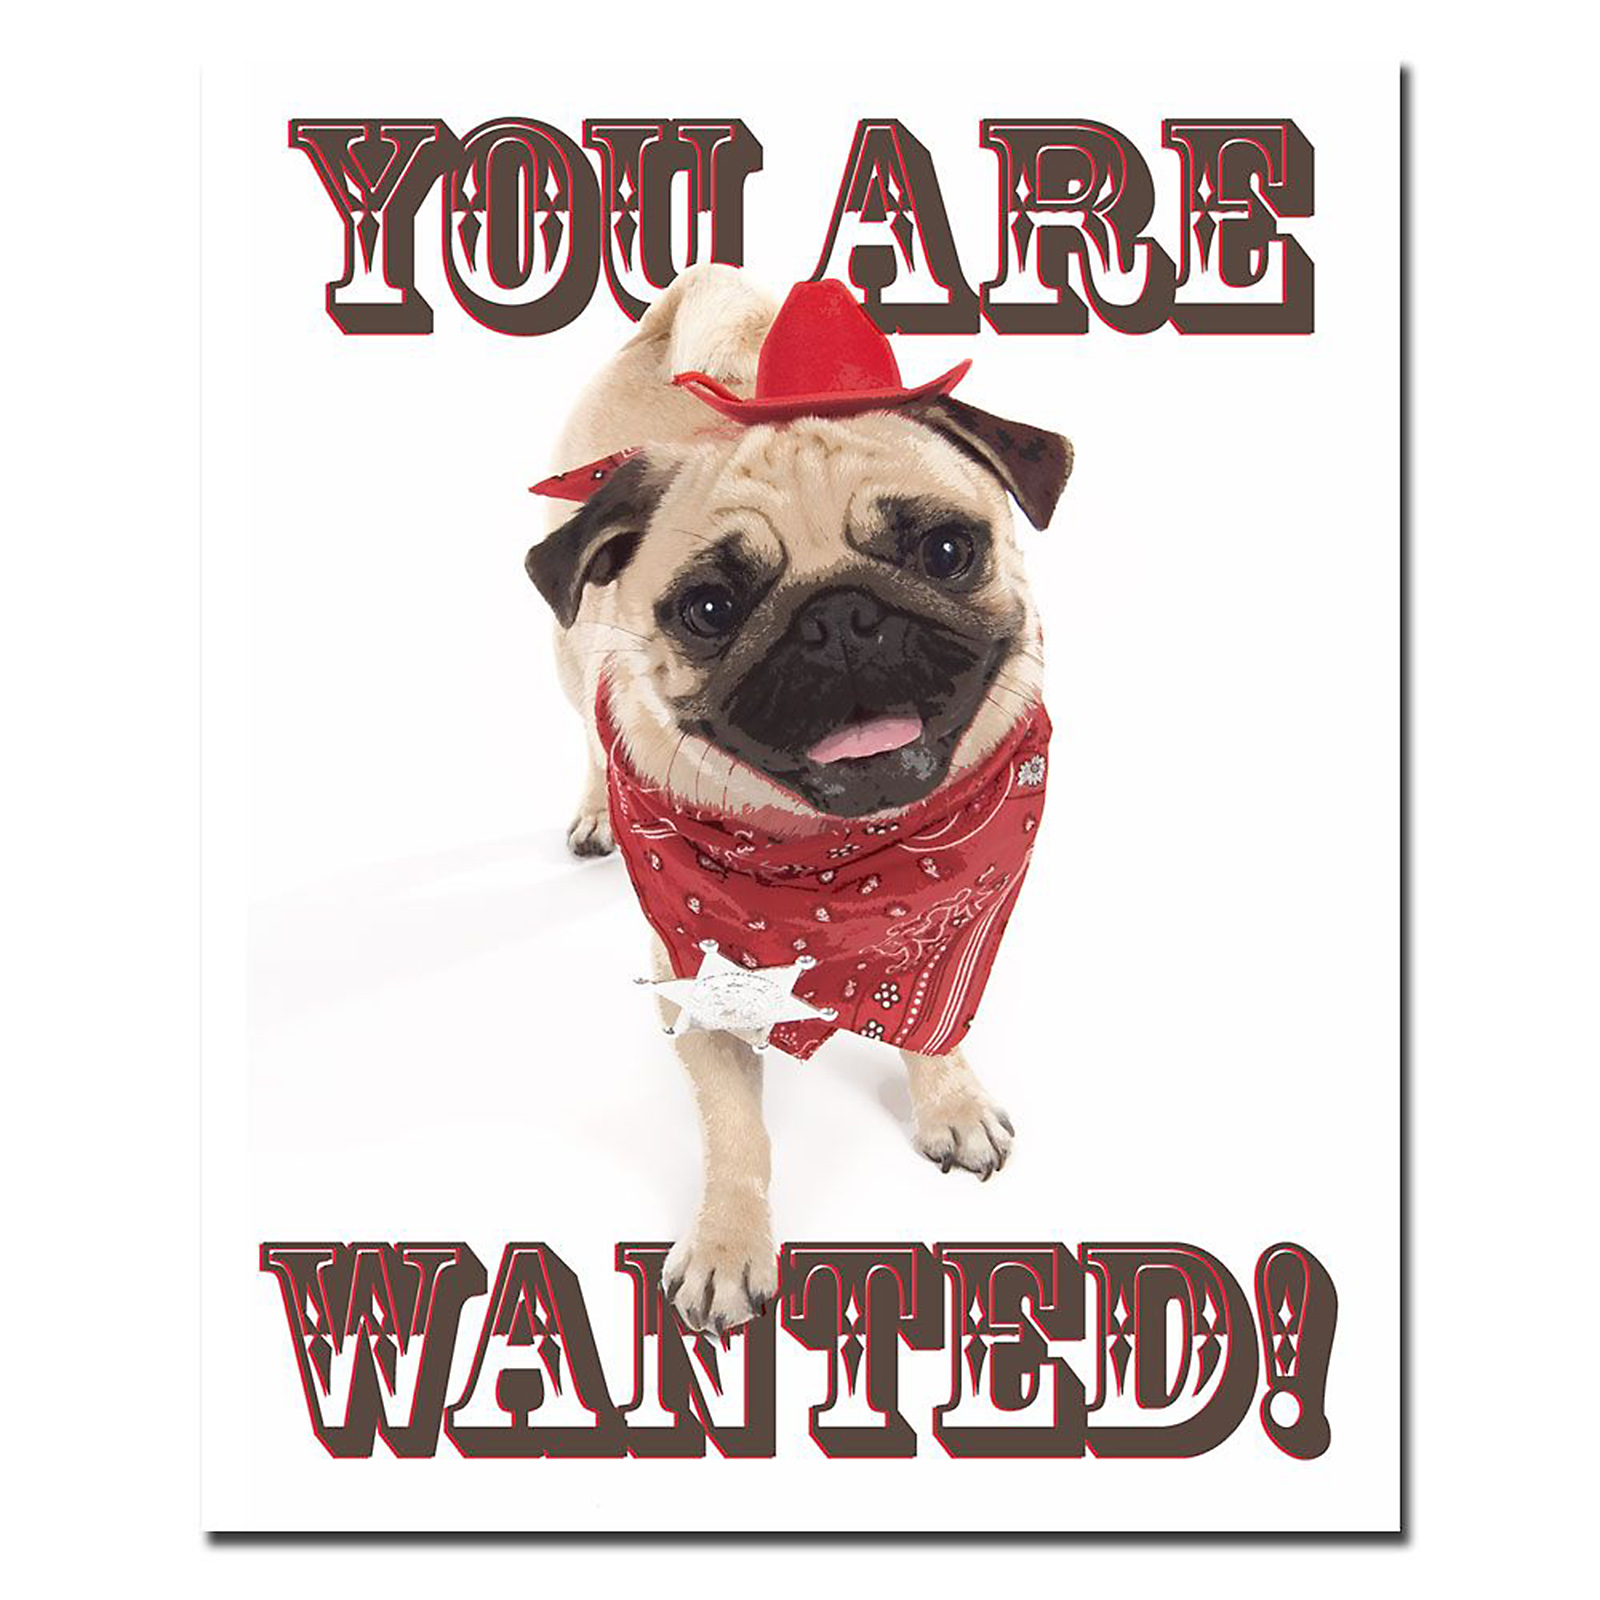 Trademark Global 26x32 inches "You Are Wanted" by Gifty Idea Greeting Cards and Such!